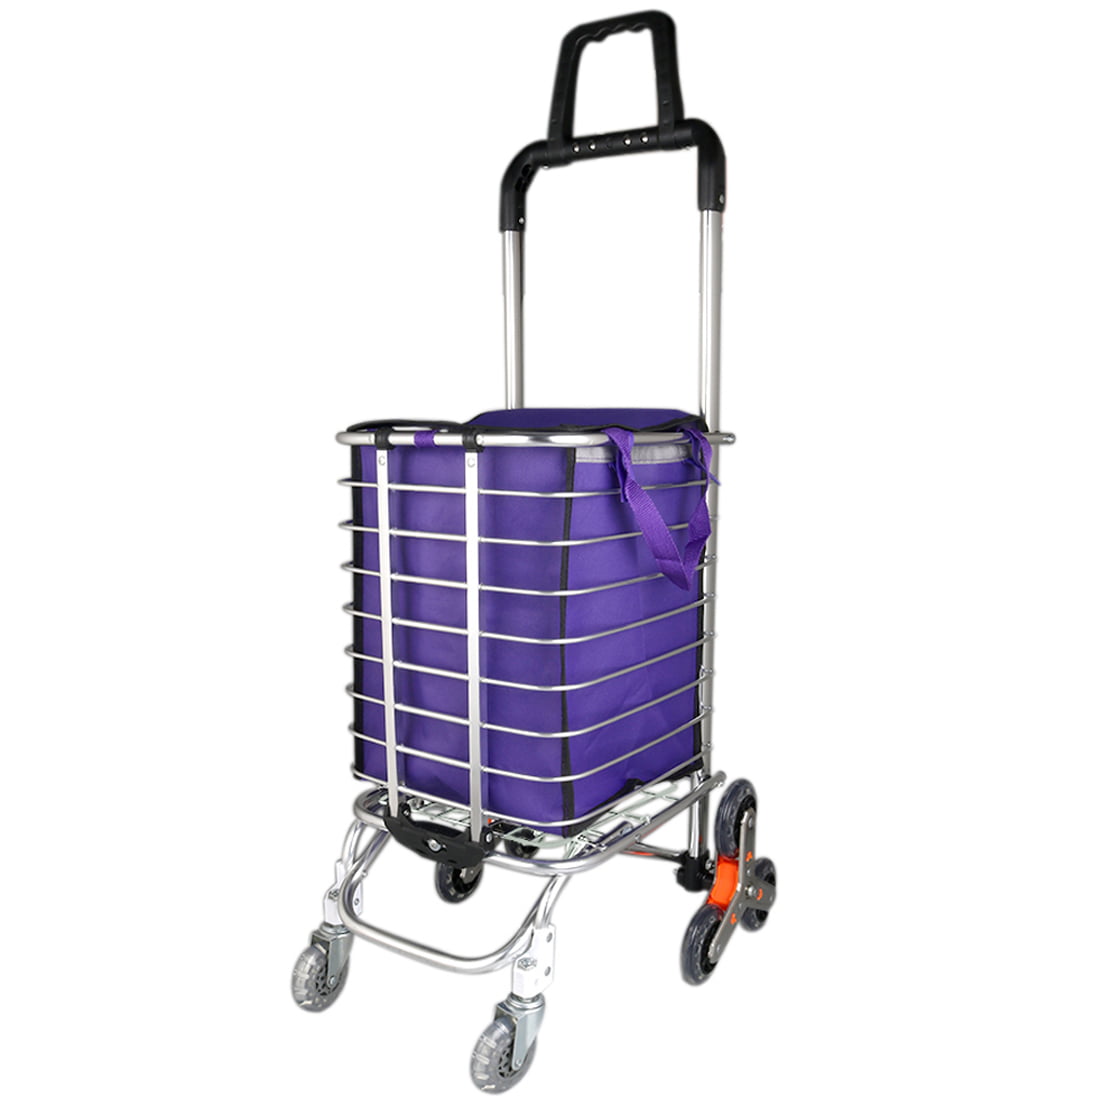 BLRYP Stairs Climber Cart Shopping Cart Climbing Stairs Folding Portable Shopping Cart Small Cart Old Trolley Car Hand Luggage Trailer Home,Supermarket,Grocery,Warehouse,Outdoors 